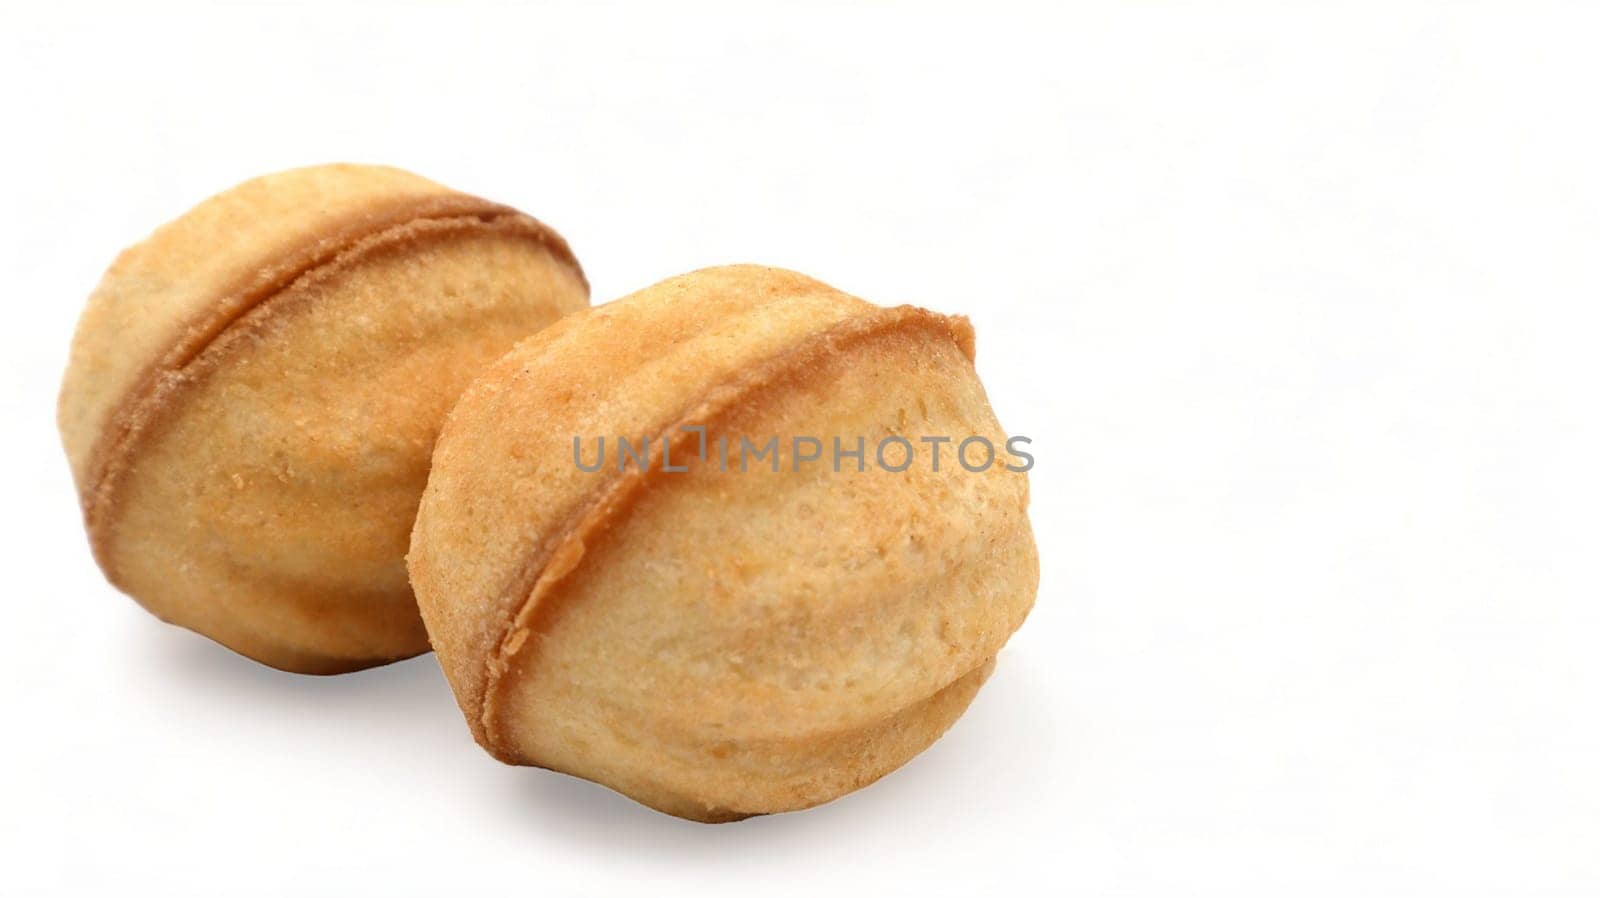 Two fresh and tasty cookies in the shape of a walnut with boiled condensed milk on a white background. A favorite delicacy for children and adults with a delicate filling inside